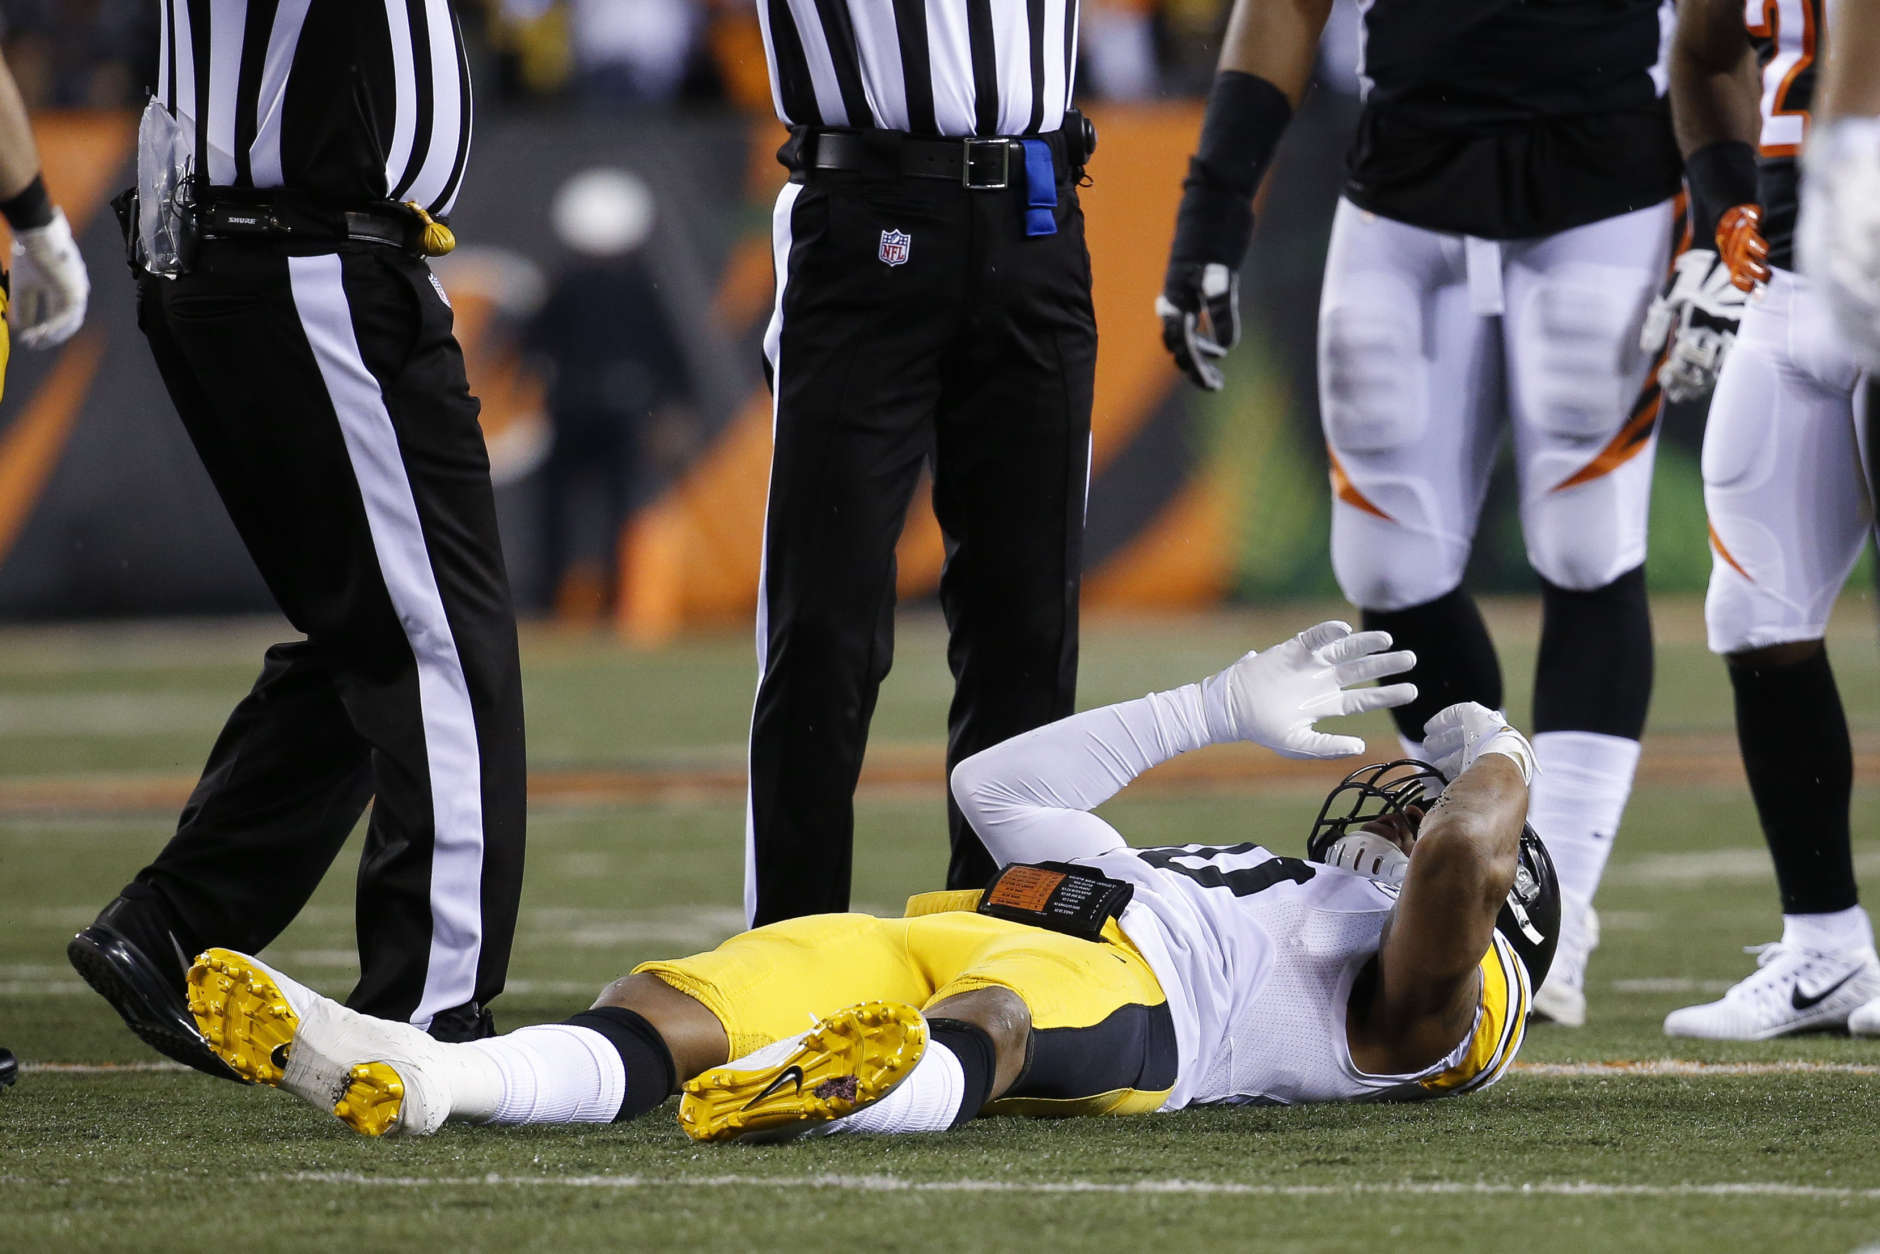 Pittsburgh Steelers inside linebacker Ryan Shazier lies on the field after an apparent injury in the first half of an NFL football game against the Cincinnati Bengals, Monday, Dec. 4, 2017, in Cincinnati. (AP Photo/Frank Victores)